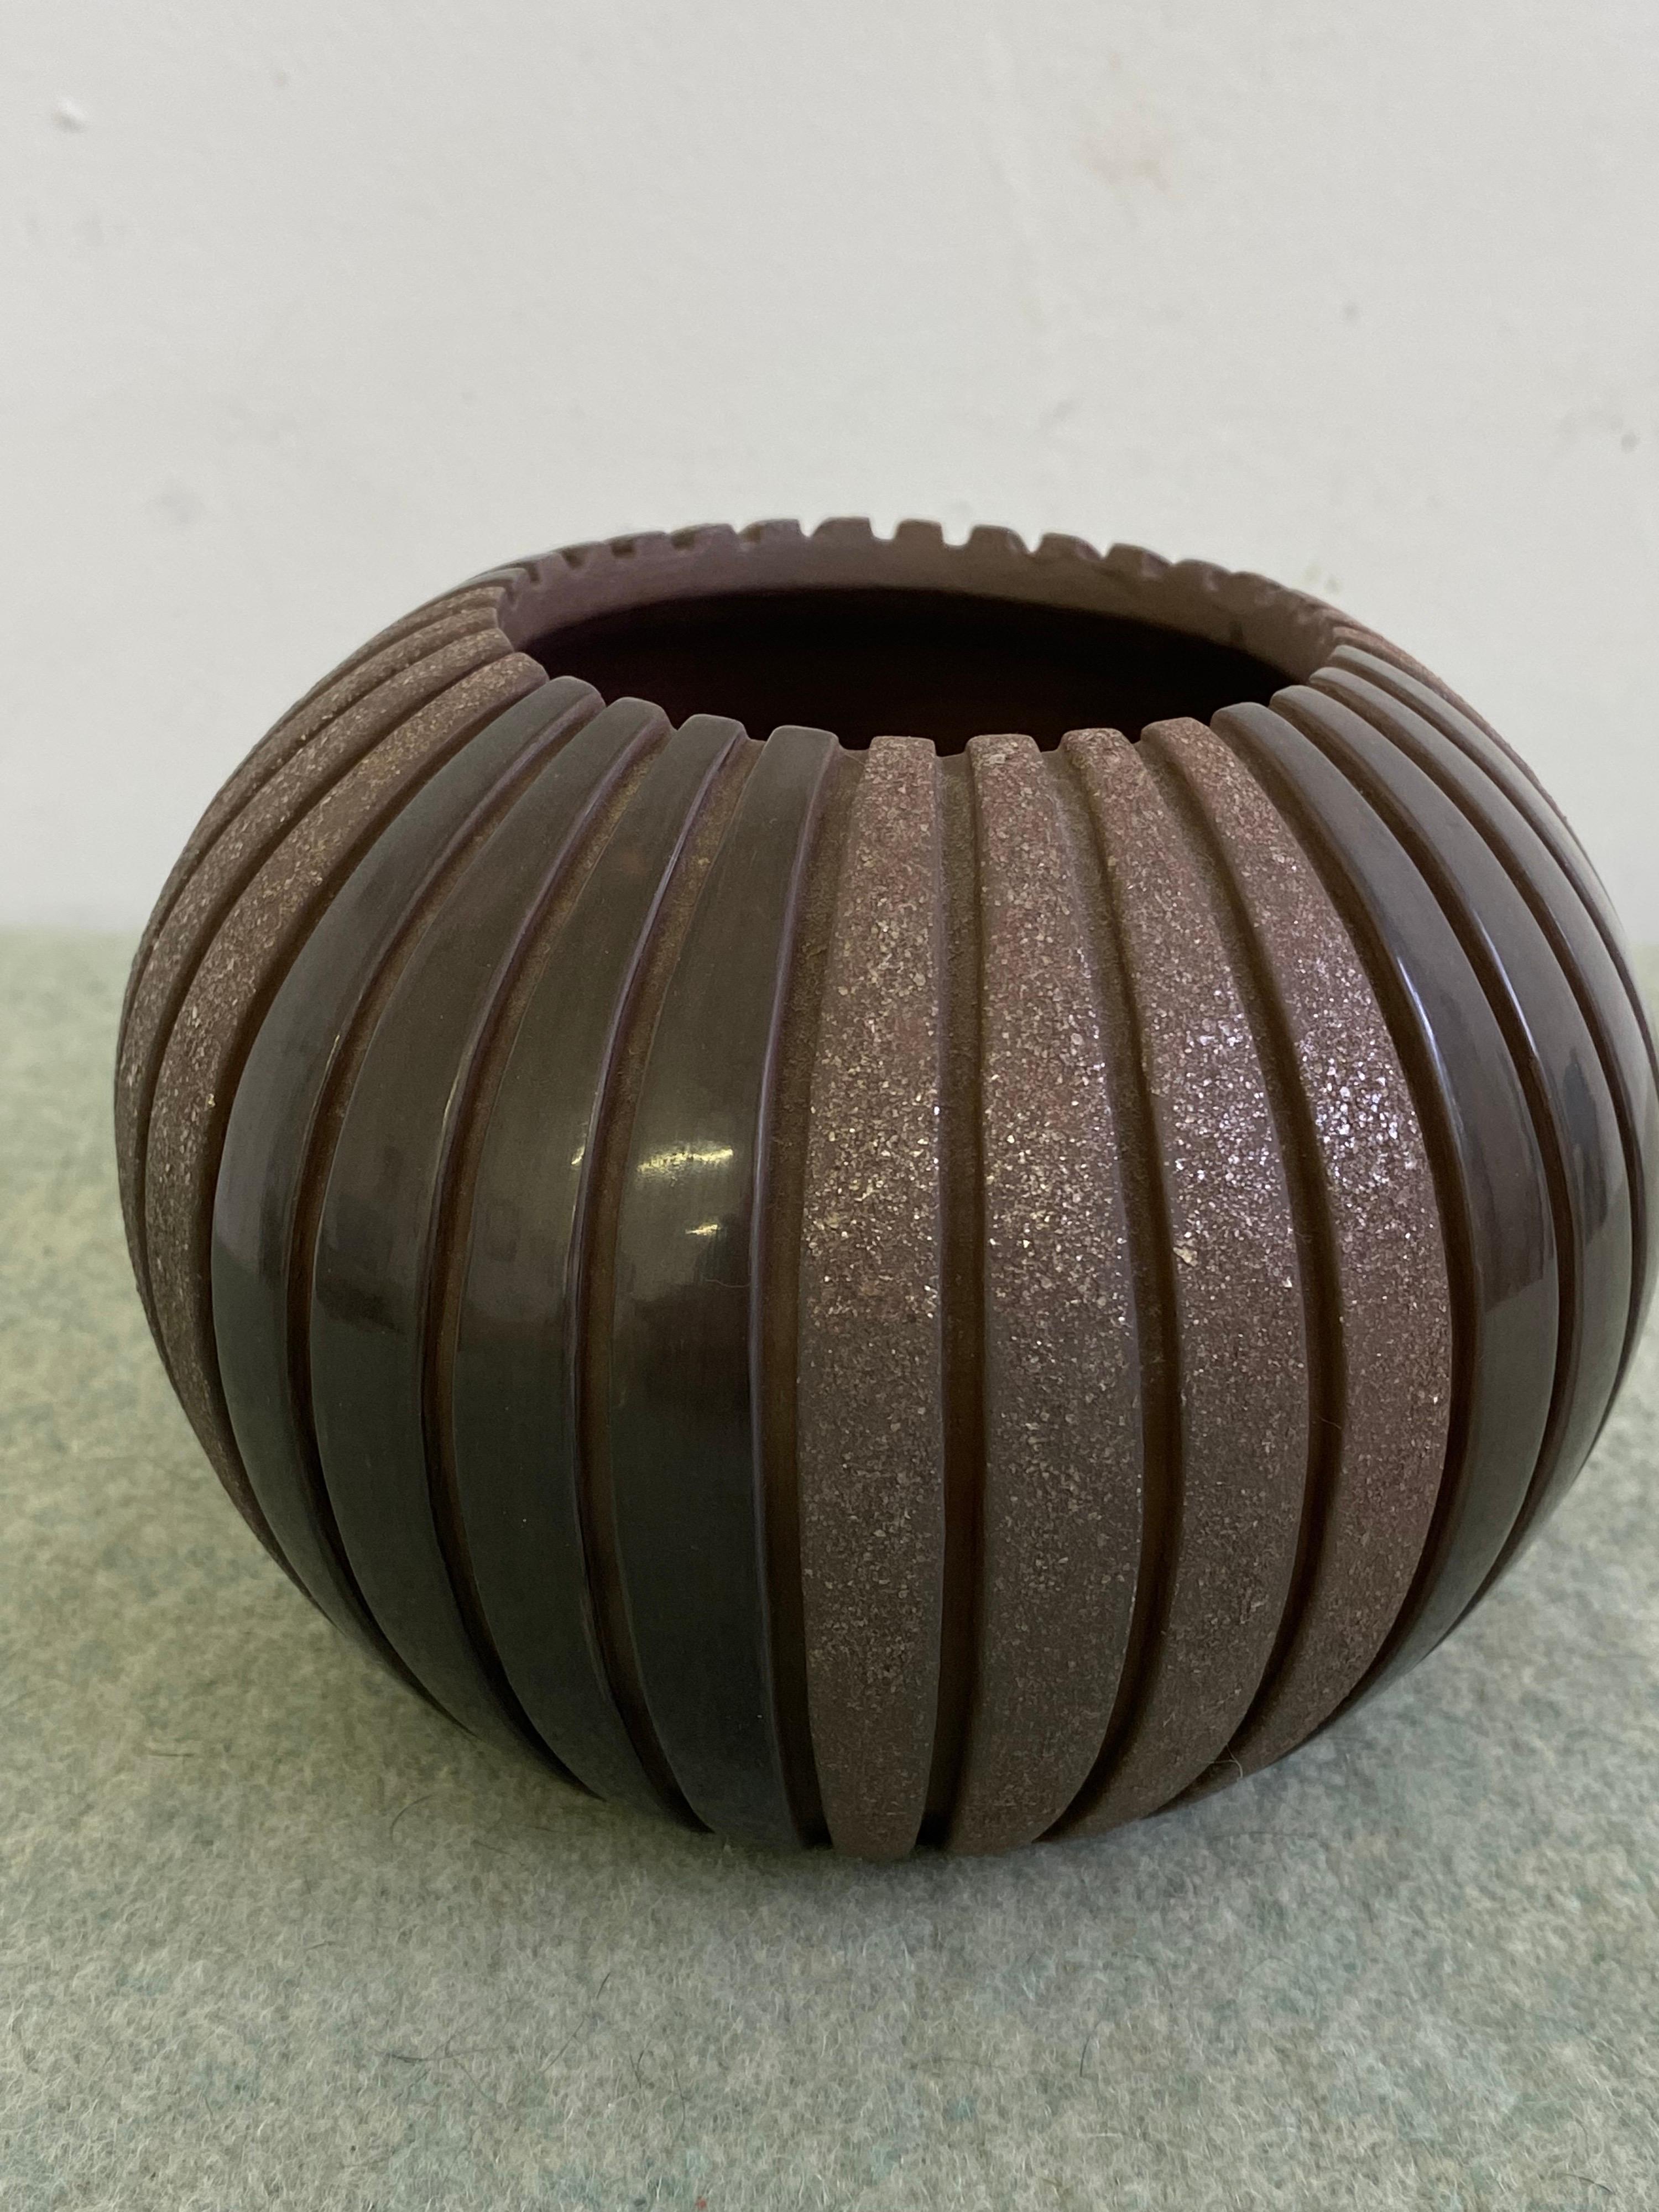 American Sue Tapia Incised Pot For Sale